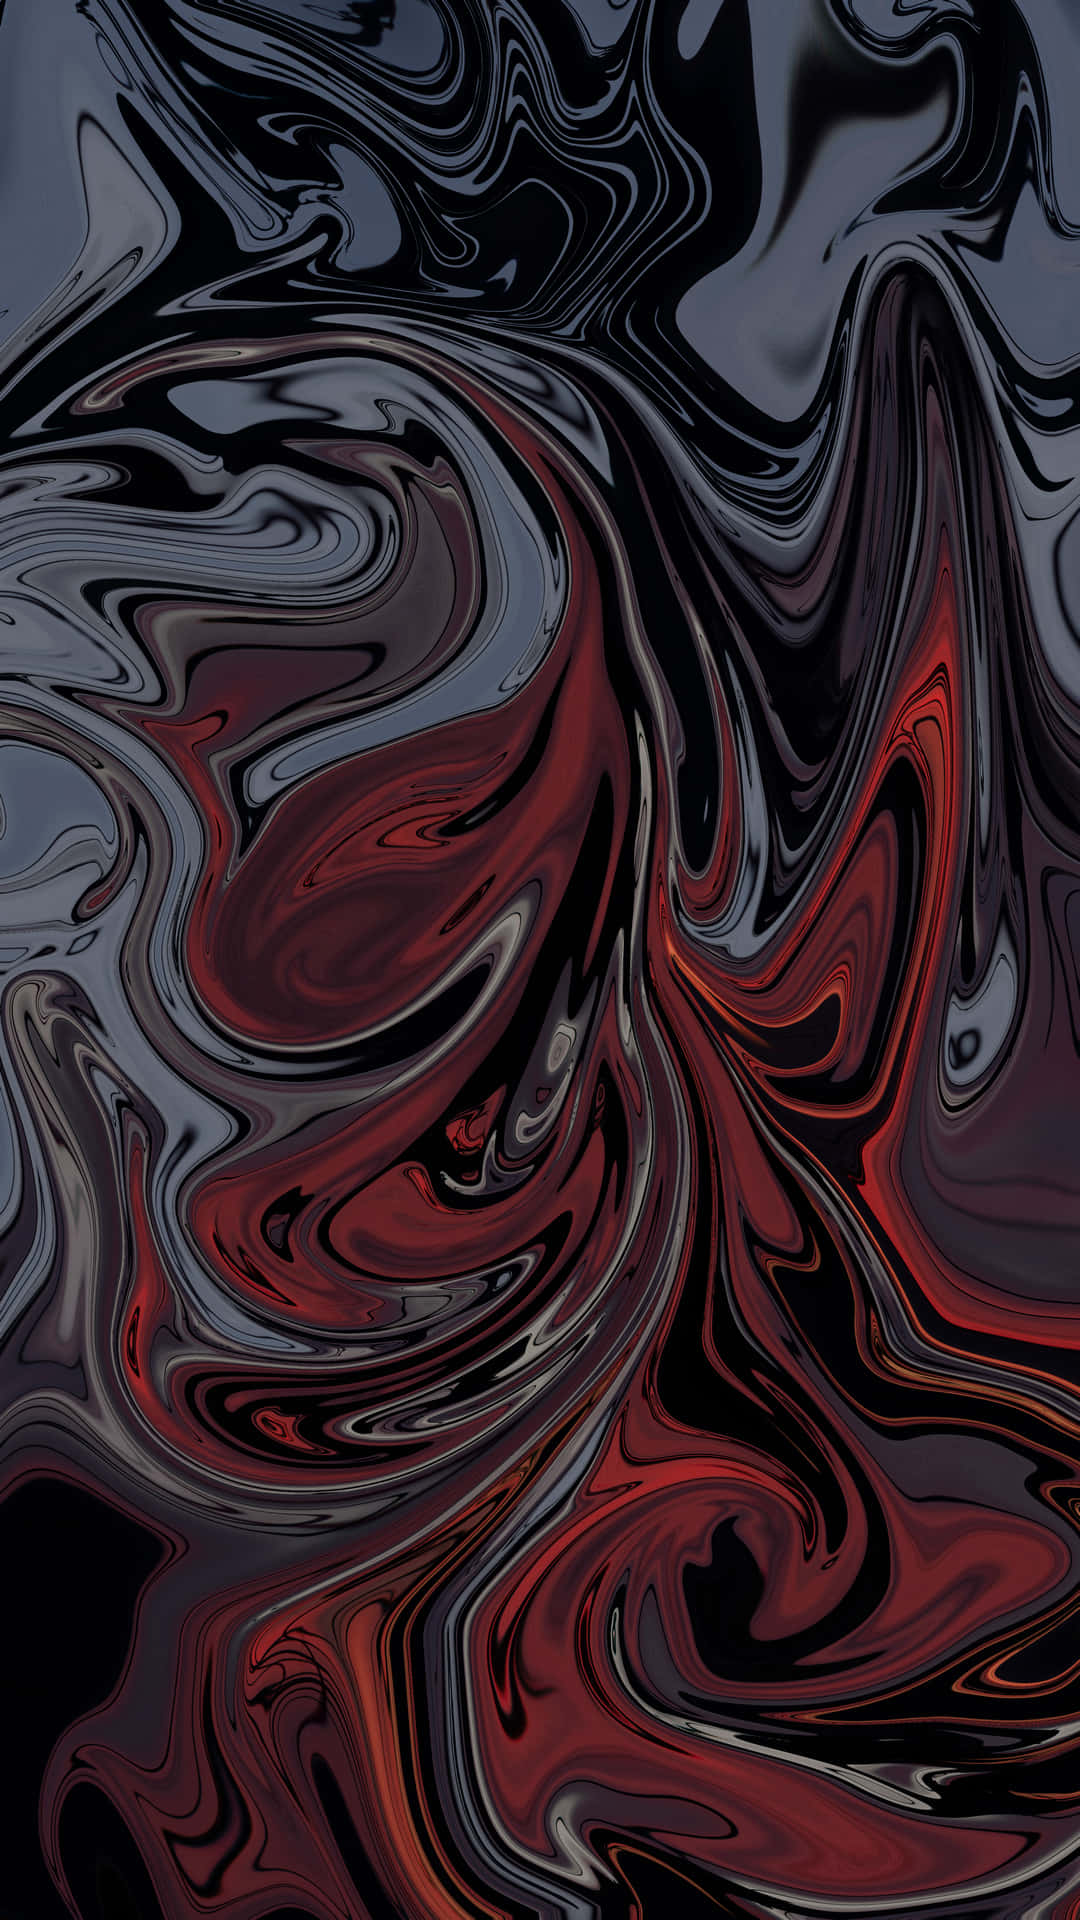 A Red And Black Swirling Liquid Background